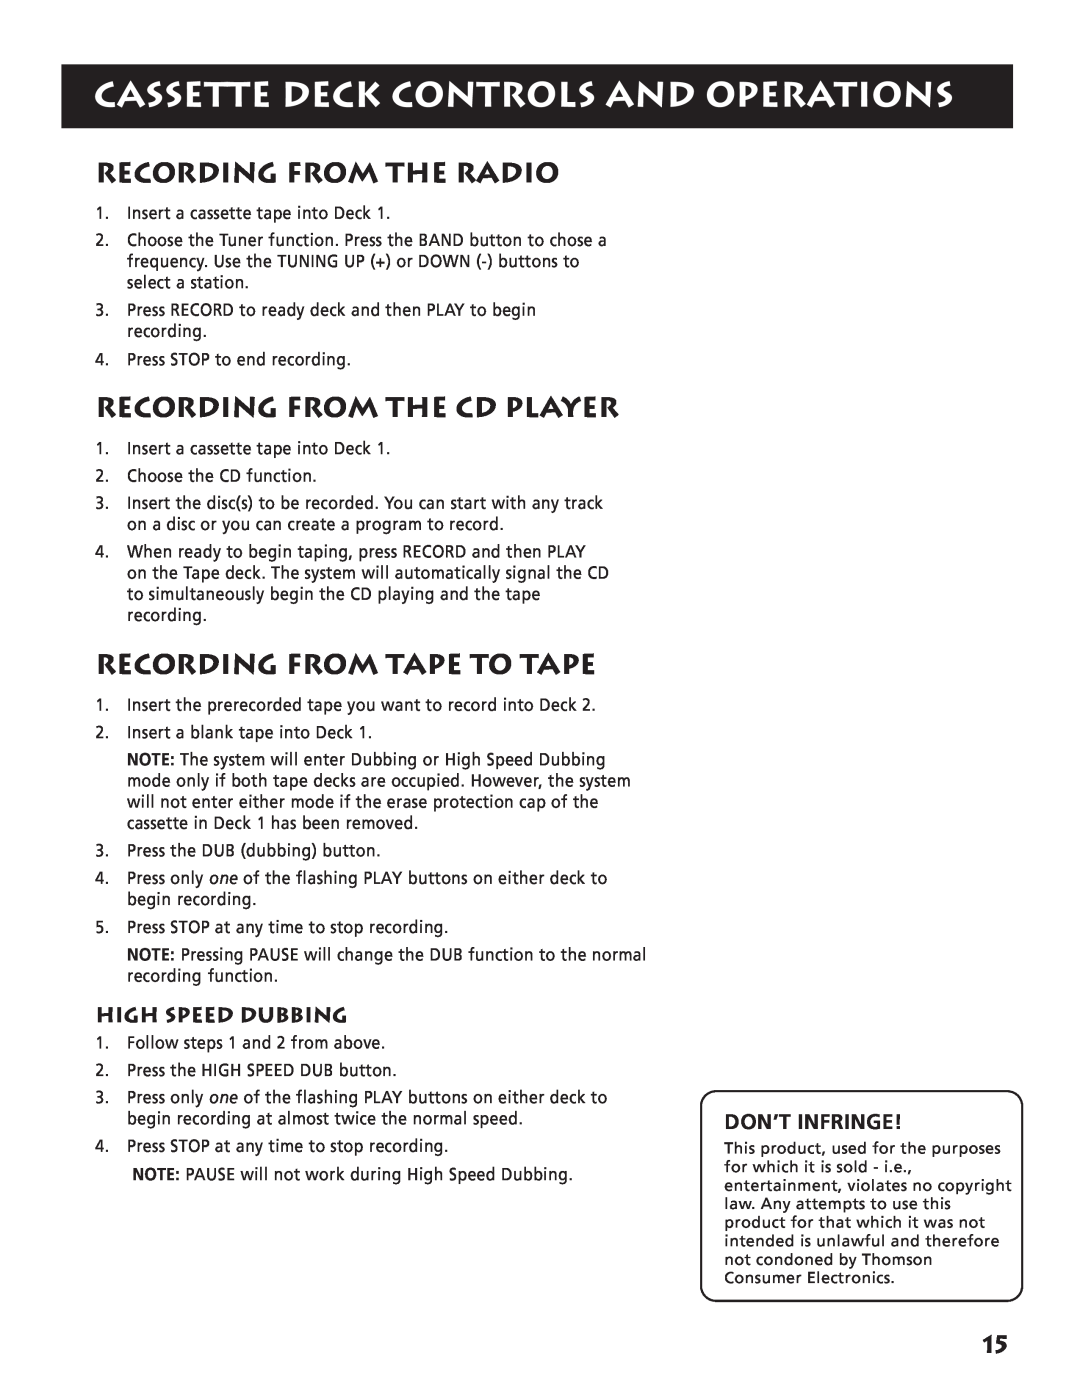 RCA RP-9380 manual Recording From The Radio, Recording From The Cd Player, Recording From Tape To Tape, High Speed Dubbing 